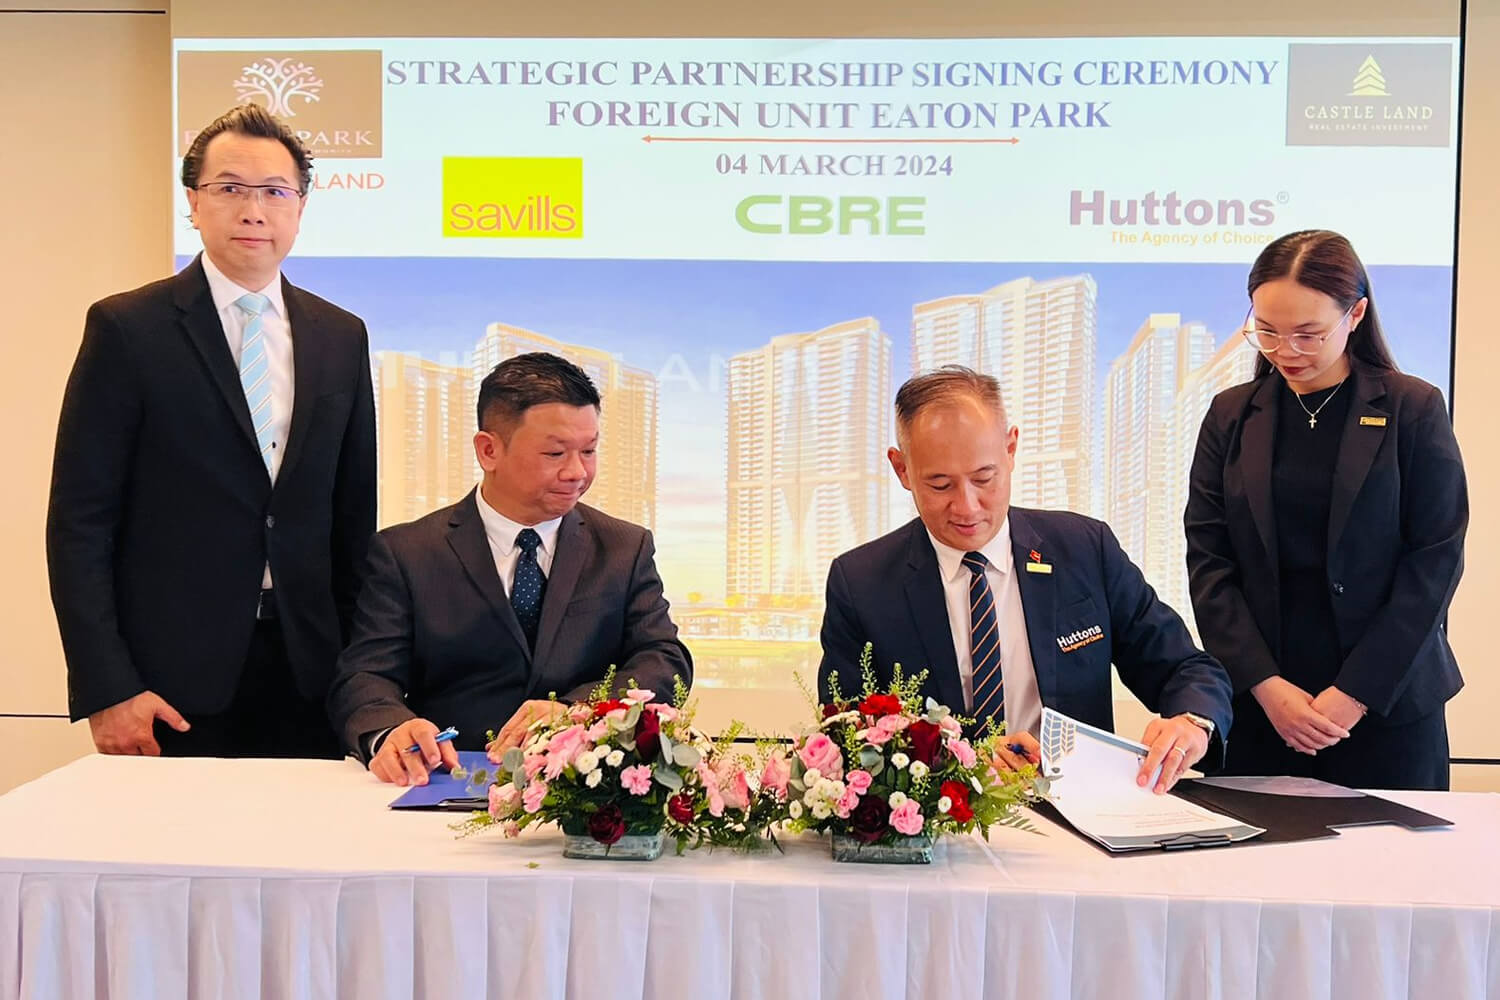 Eaton Park strategic partnership signing ceremony - Picture: Huttons VN